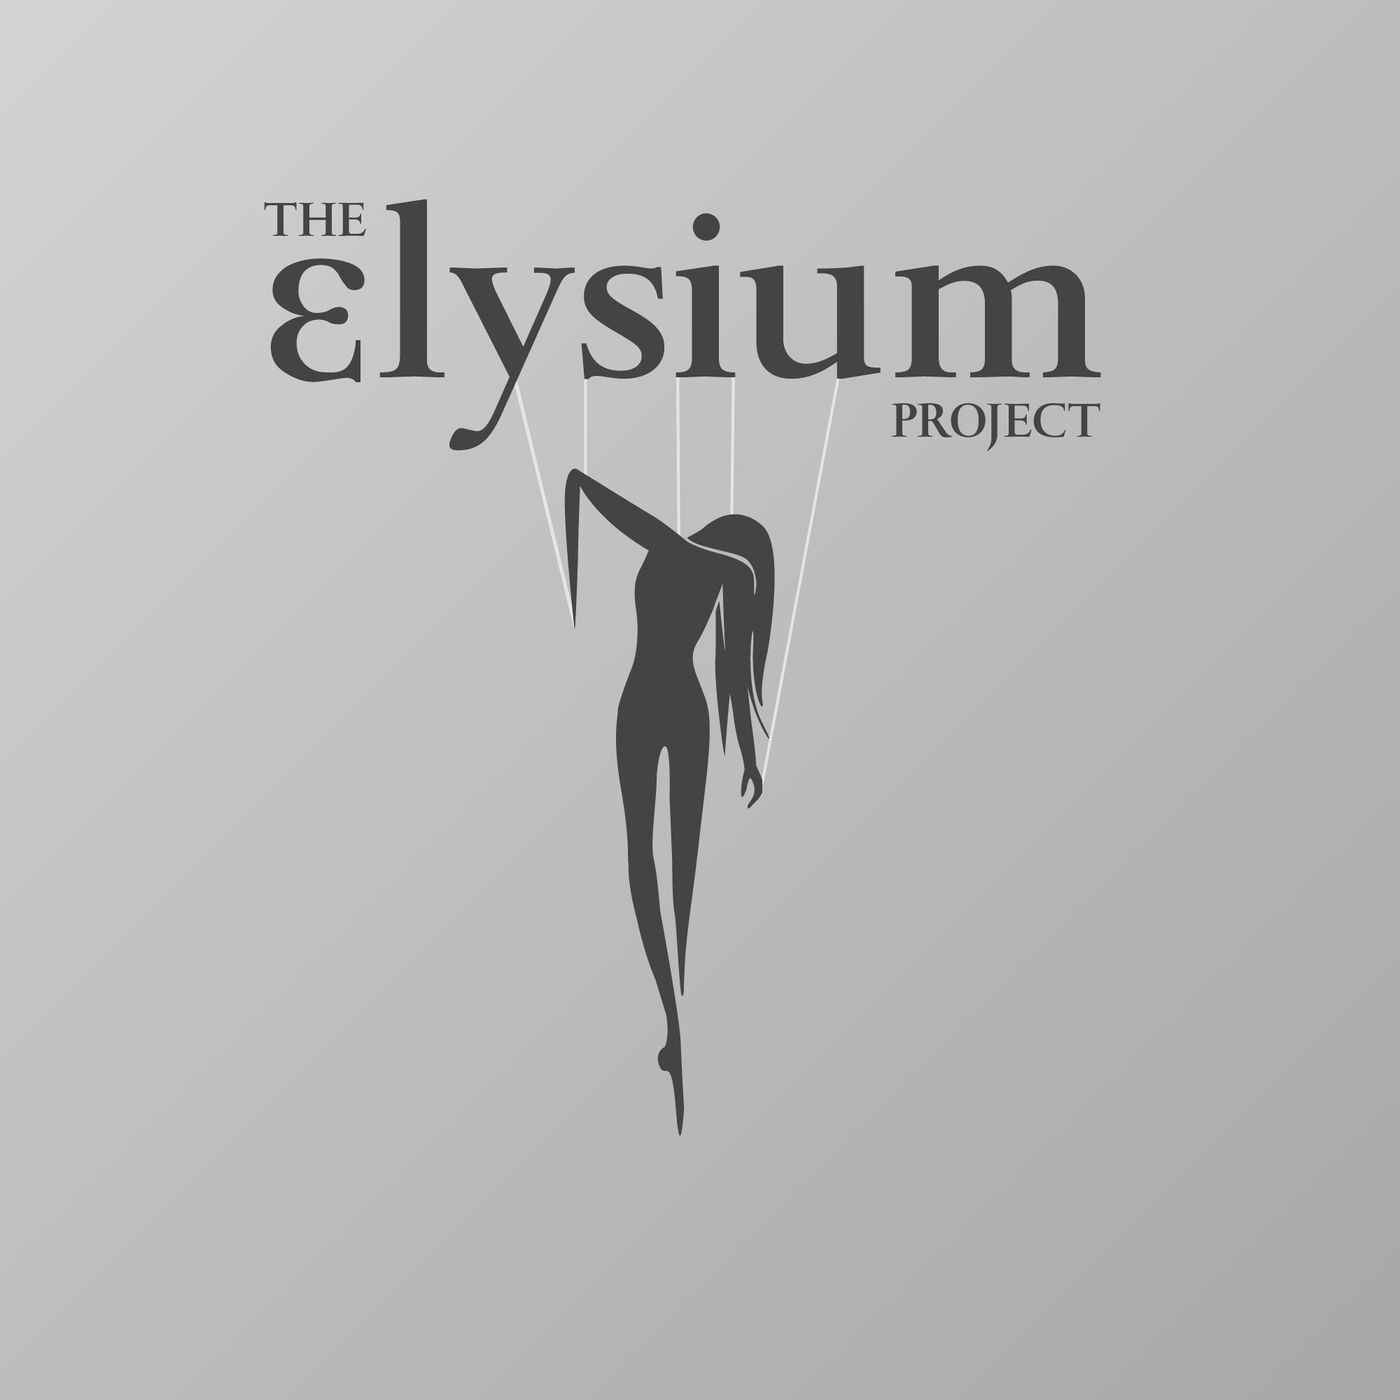 "The Elysium Project" Podcast